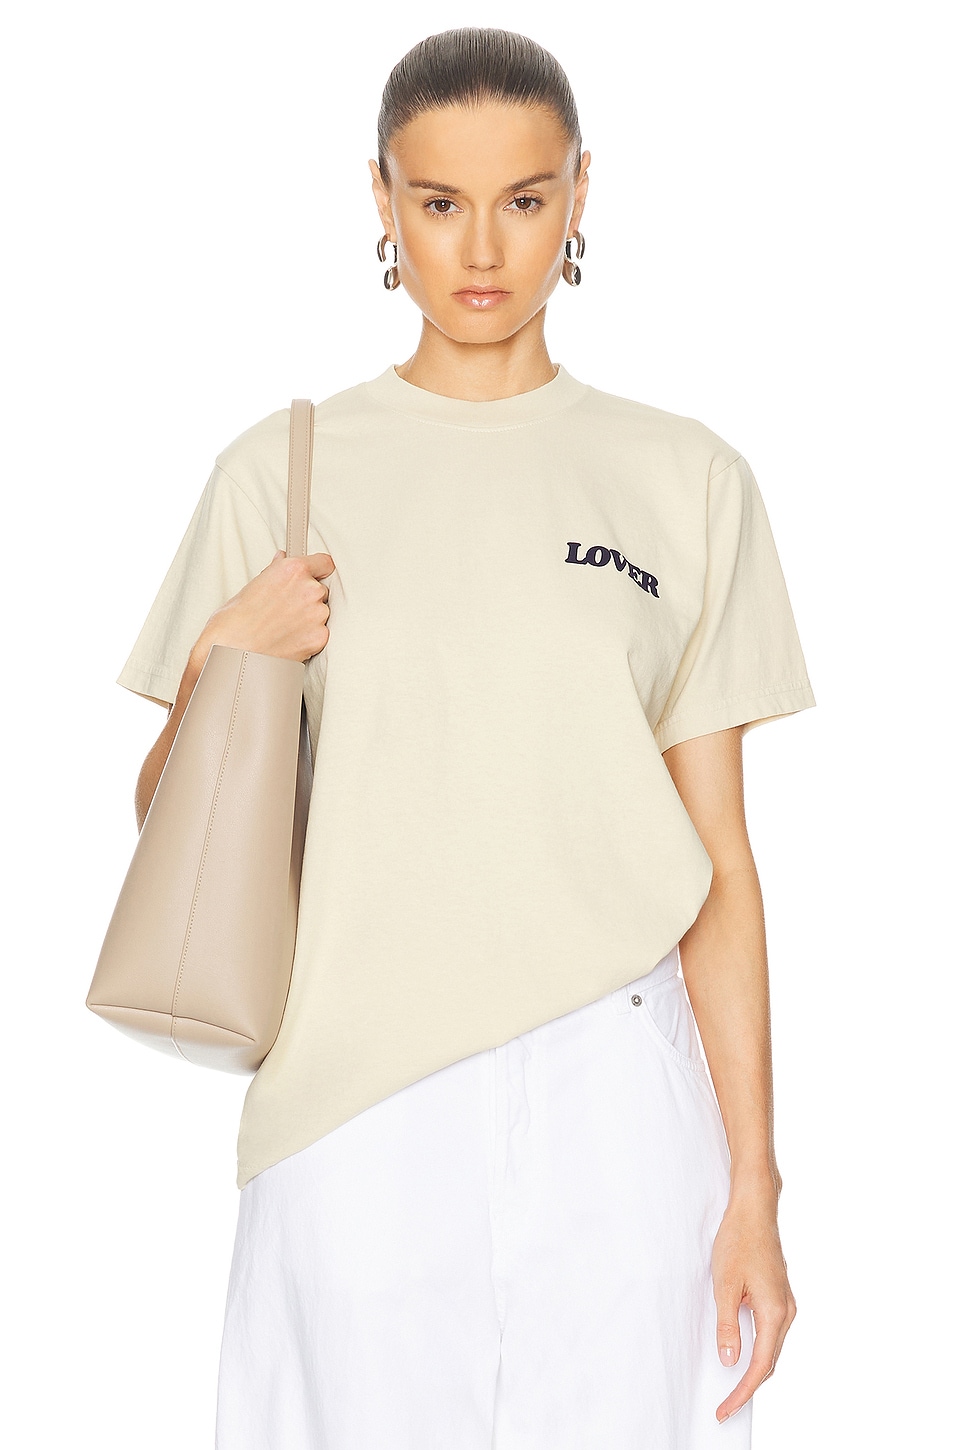 Lover Side Logo Shirt in Taupe